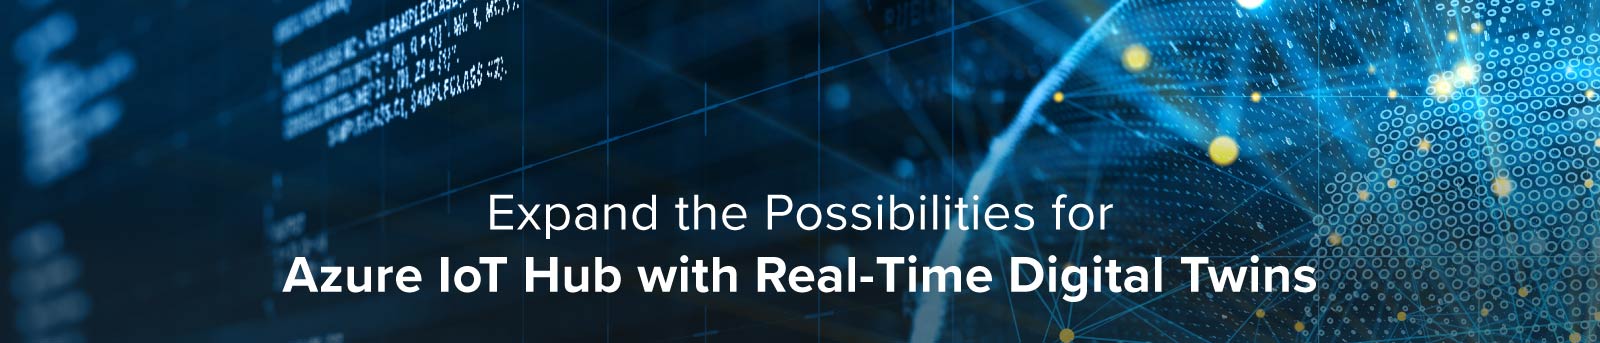 Expand the Possibilities for Azure IoT Hub with Real-Time Digital Twins